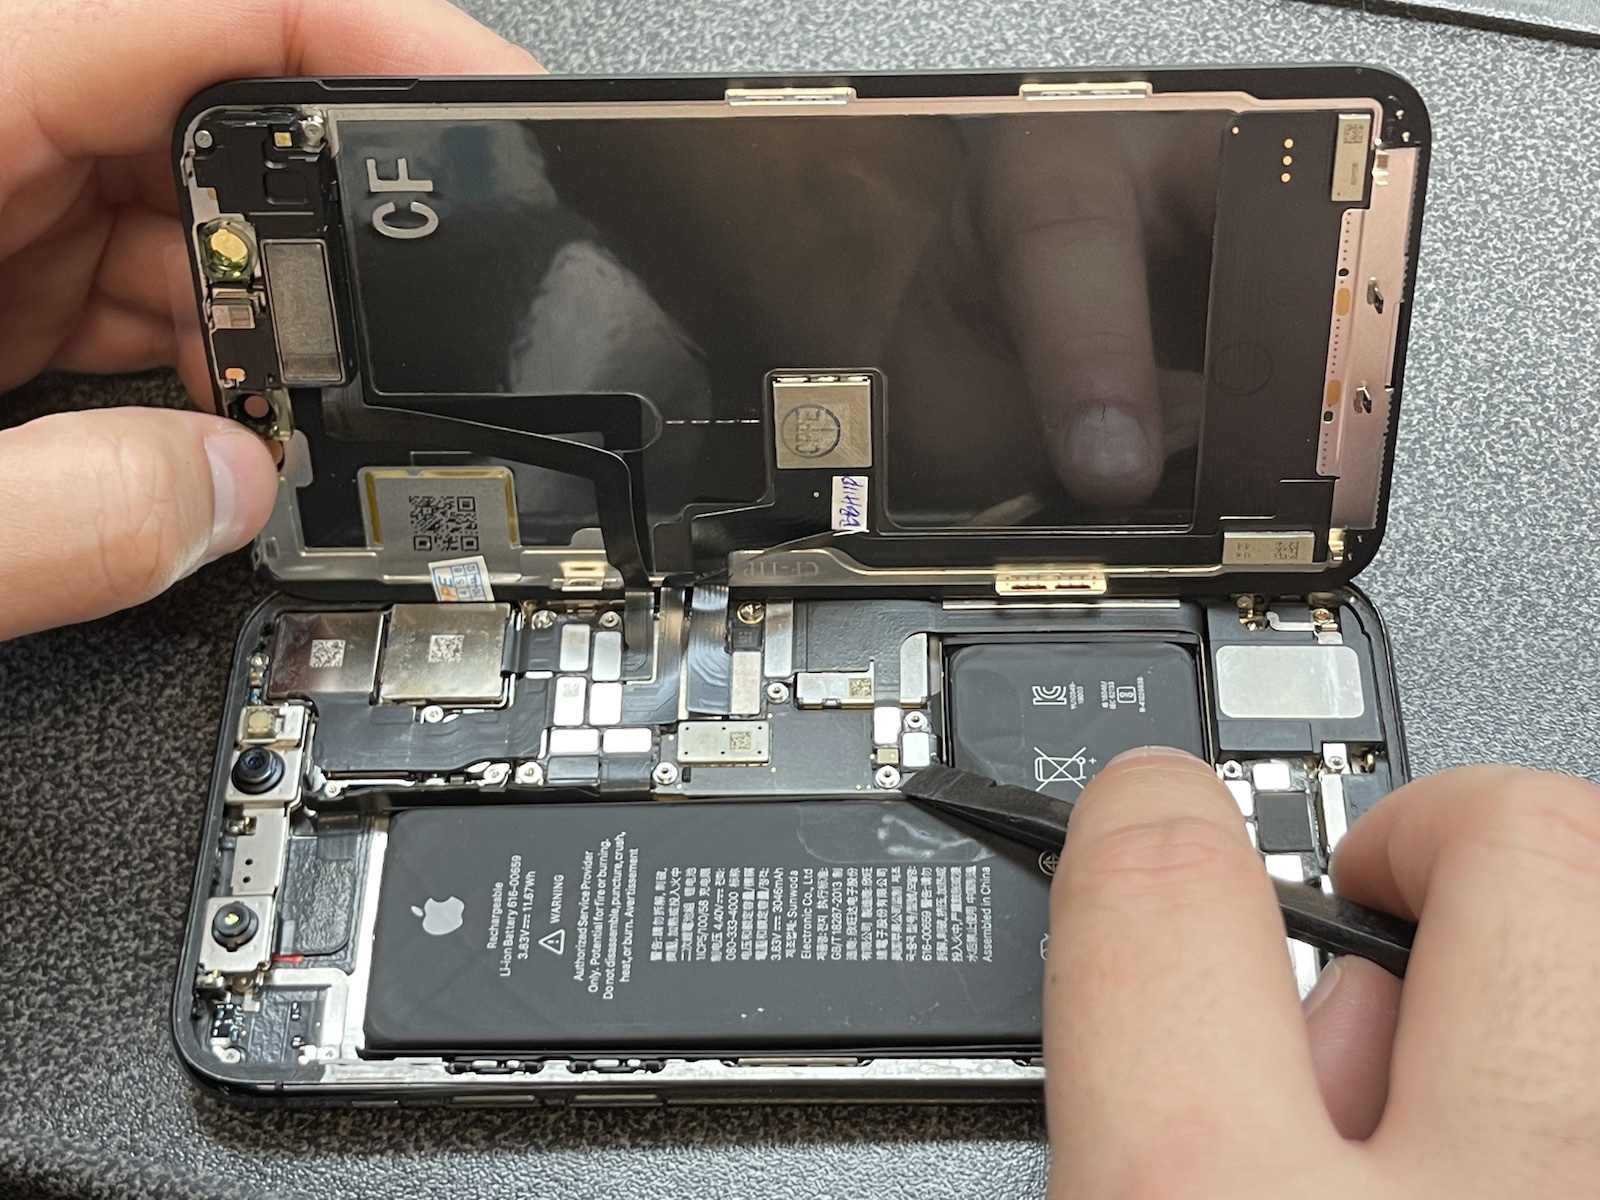  Specialized-iPhone-repairs 